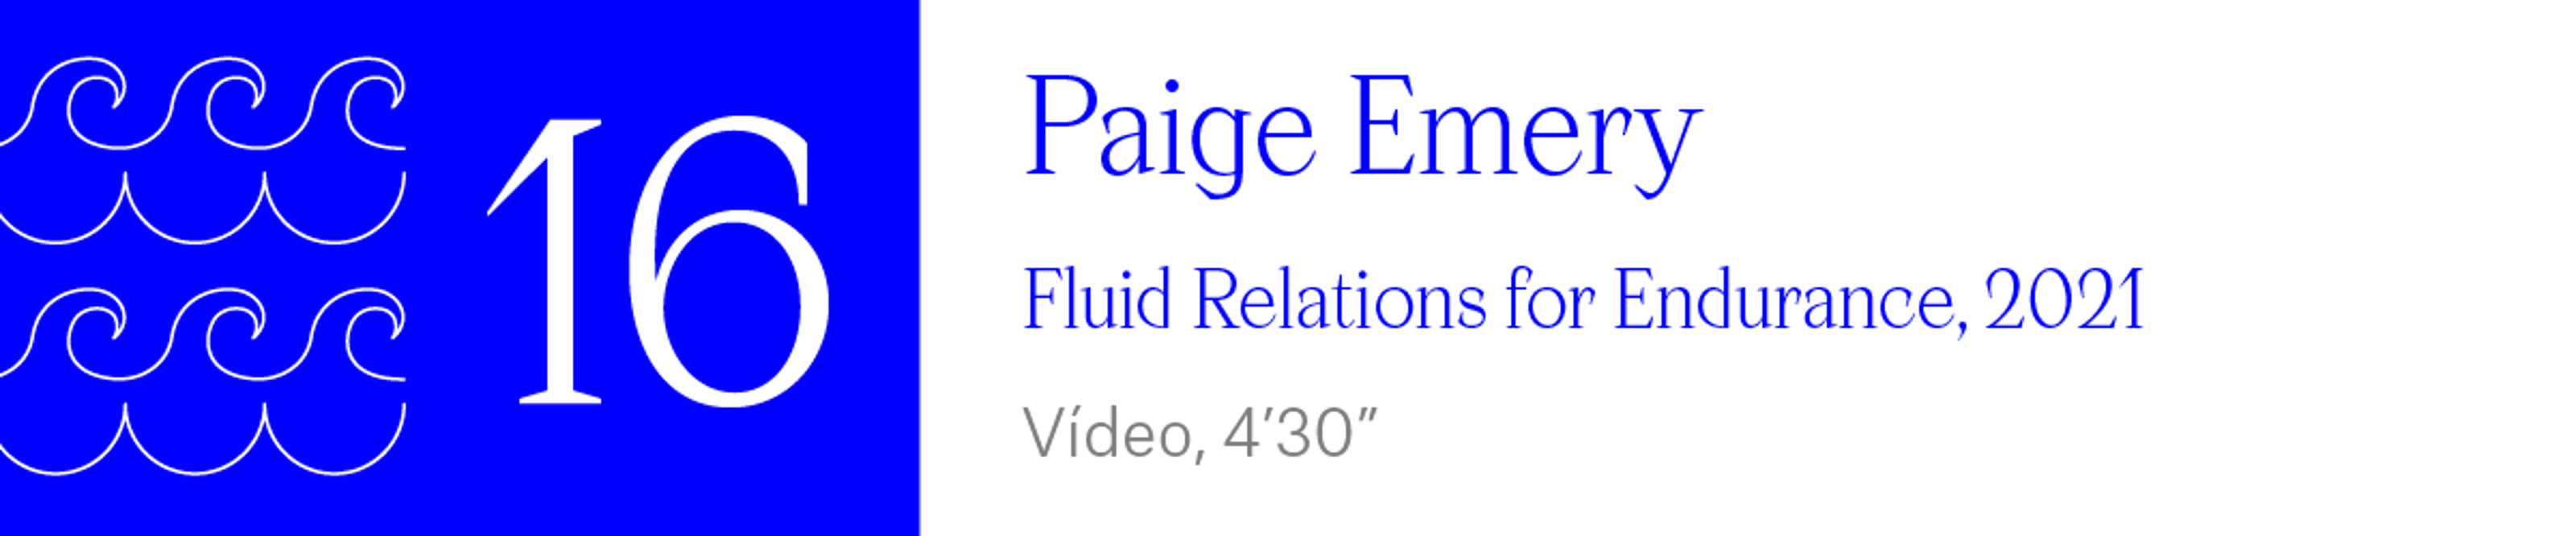 The Wave (16) Paige Emery - Fluid Relations for Endurance, 2021 Vídeo, 4’30”